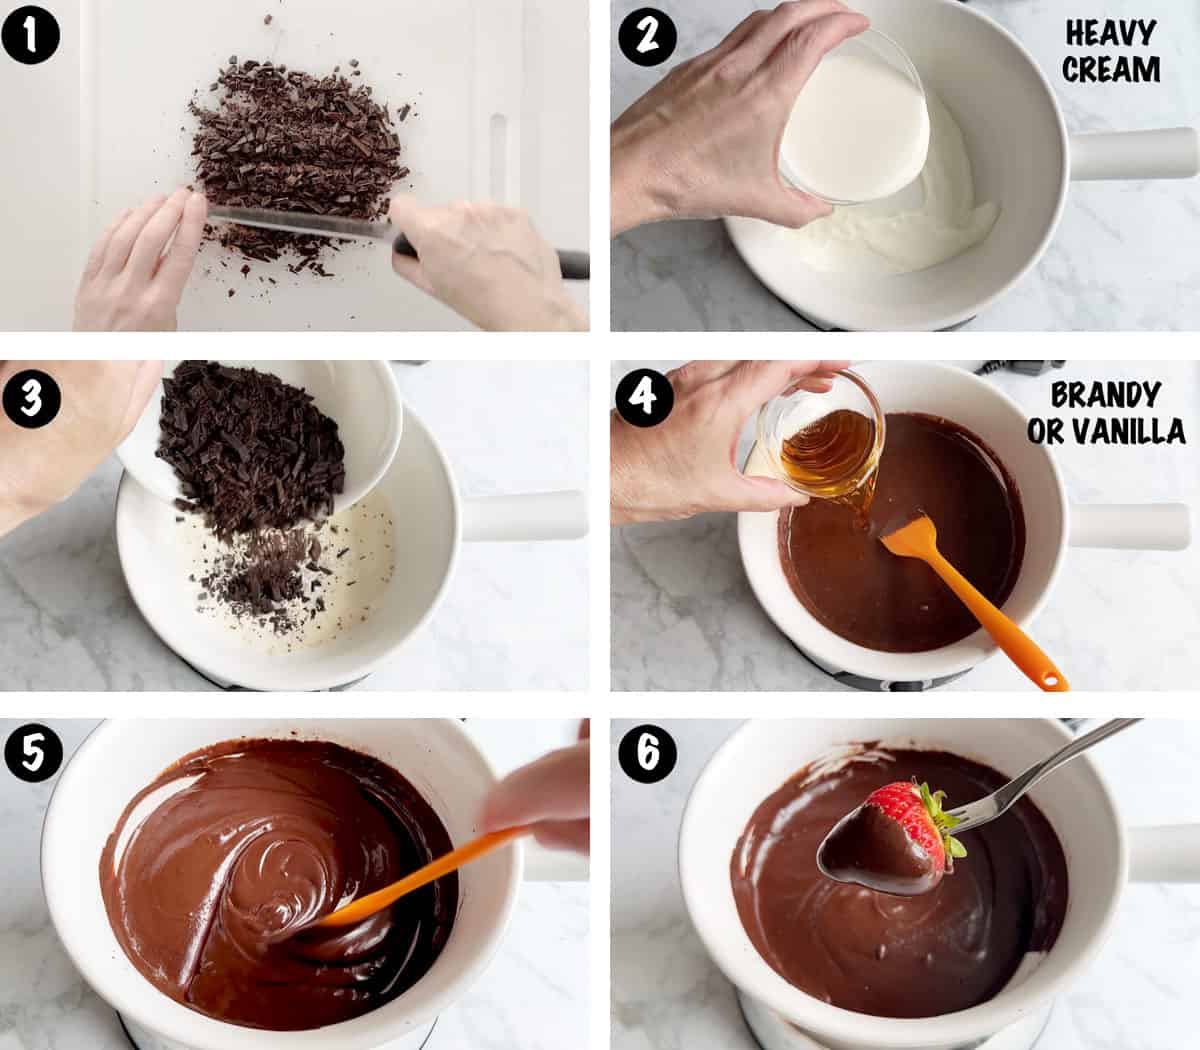 A six-photo collage showing the steps for making a homemade chocolate fondue. 